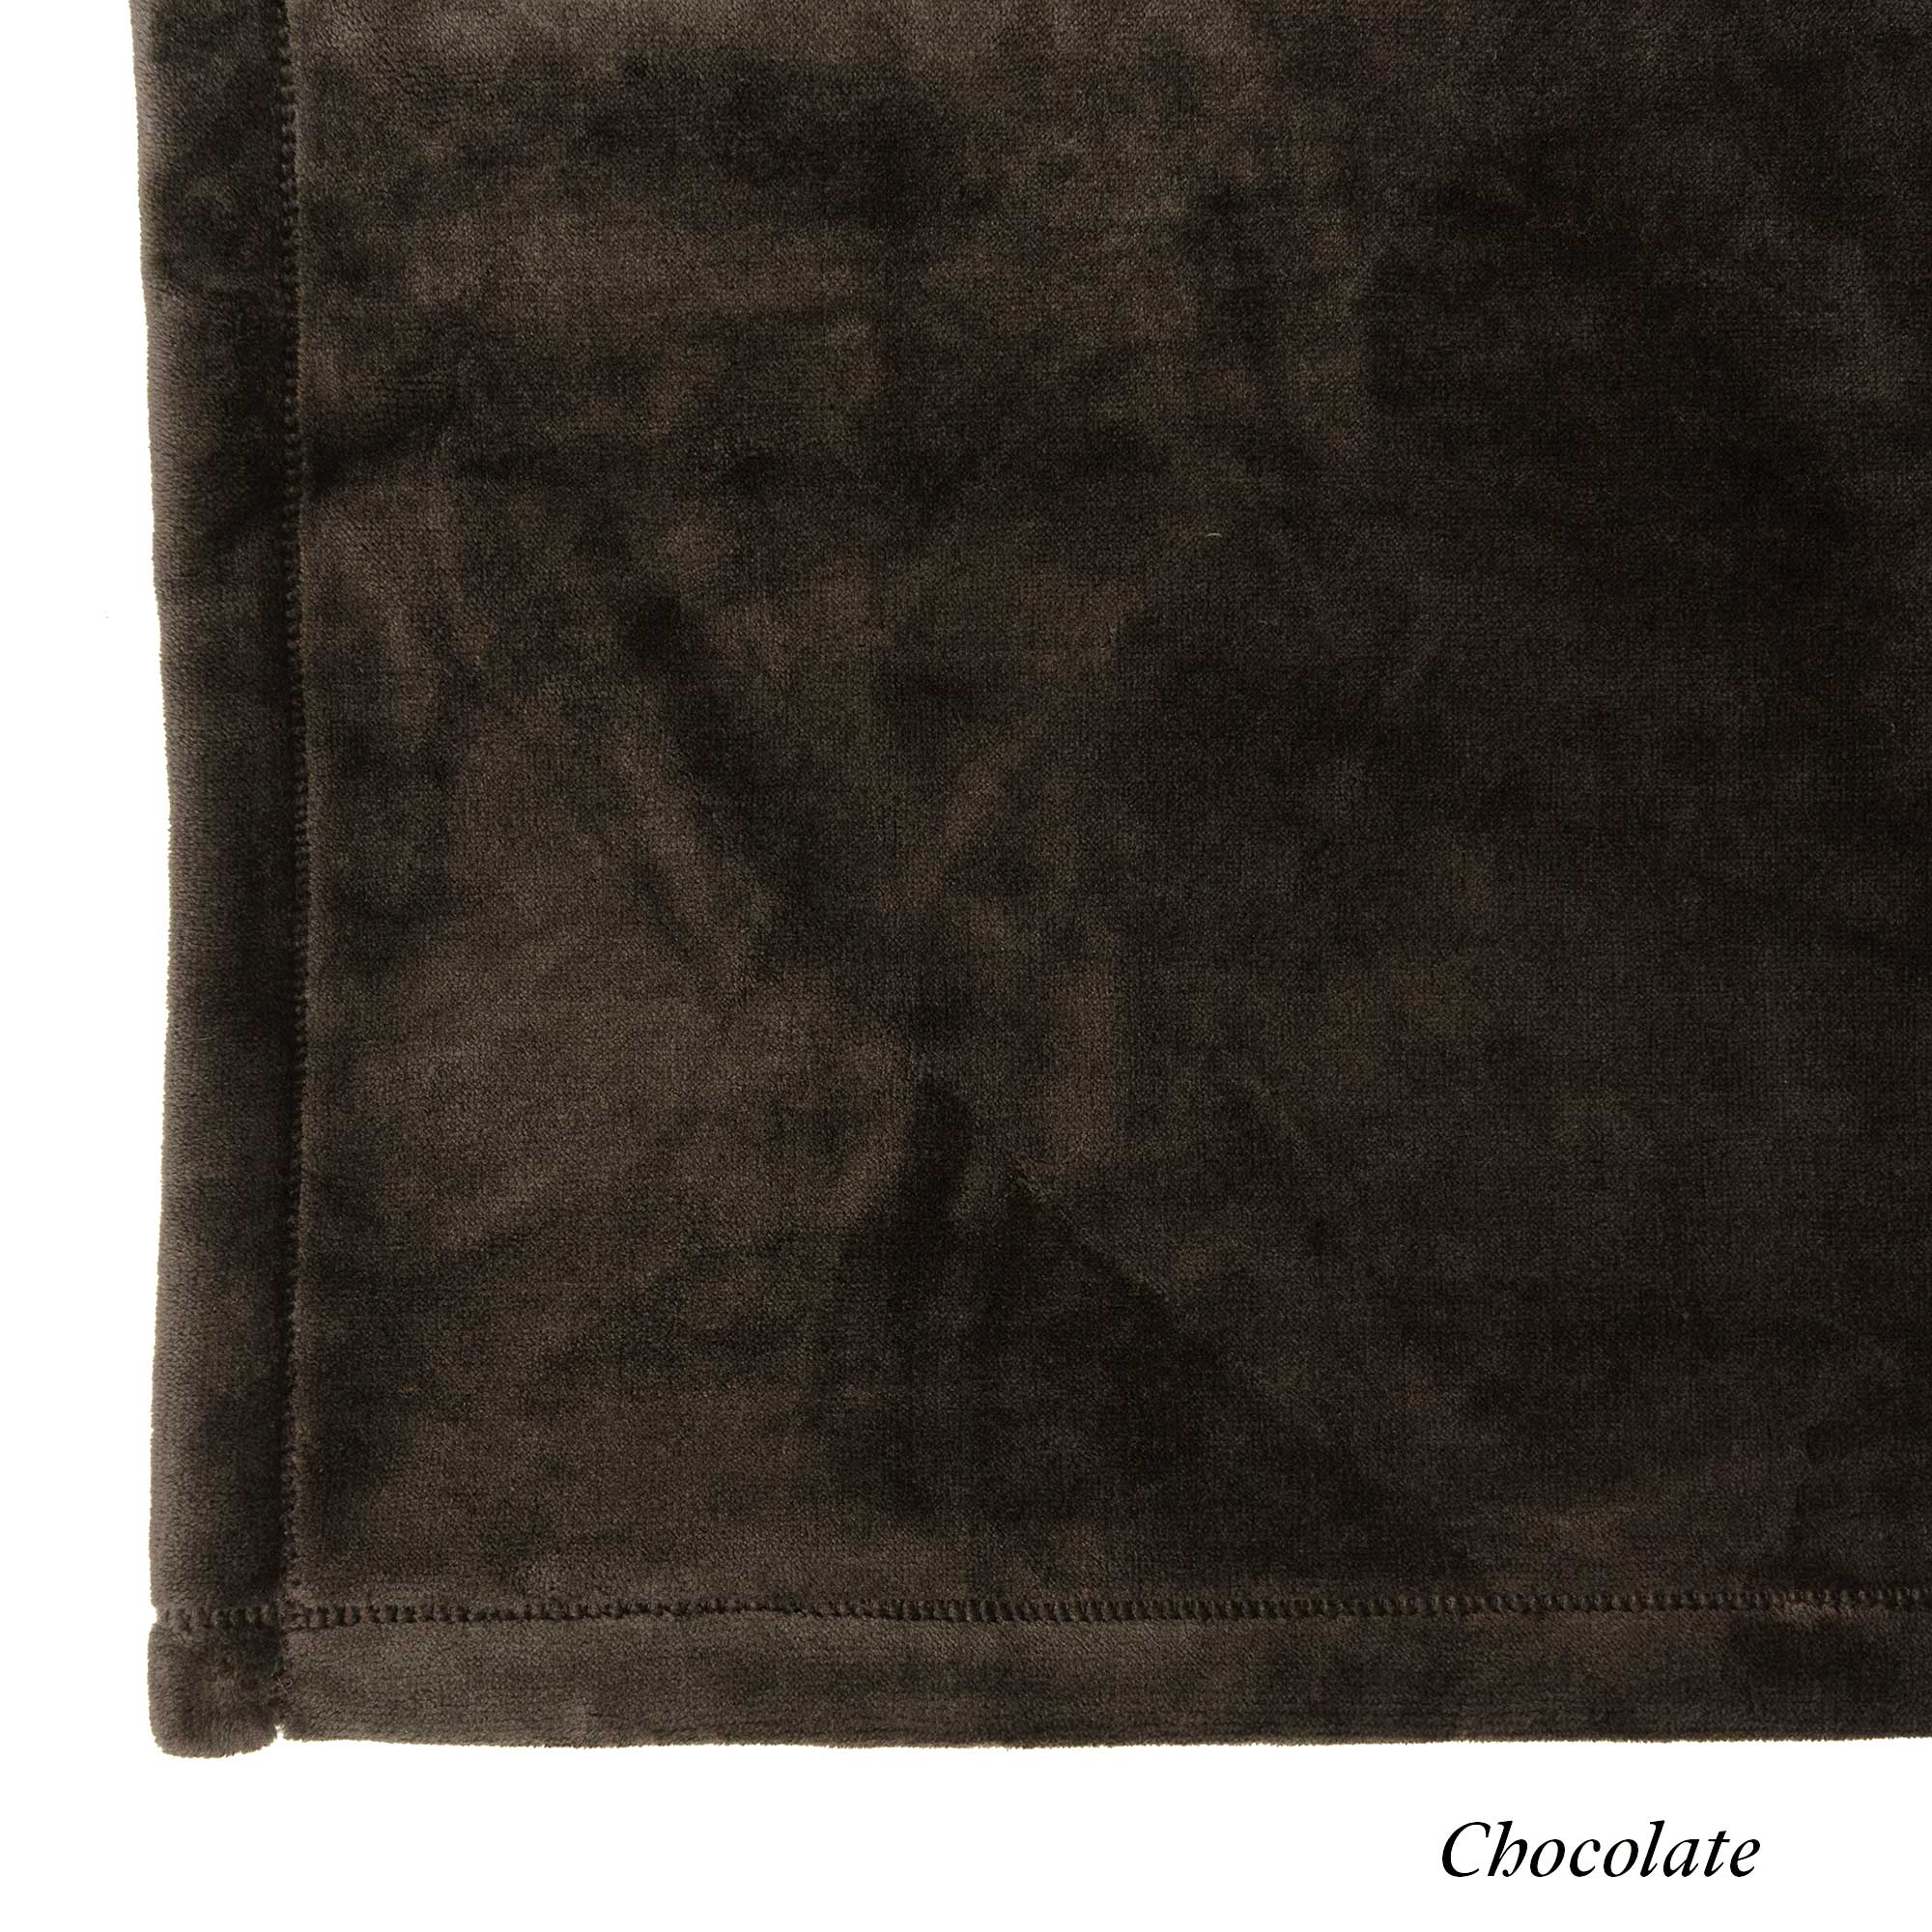 Chocolate Brown and Black Bath Towels Custom Made With Your Fabric